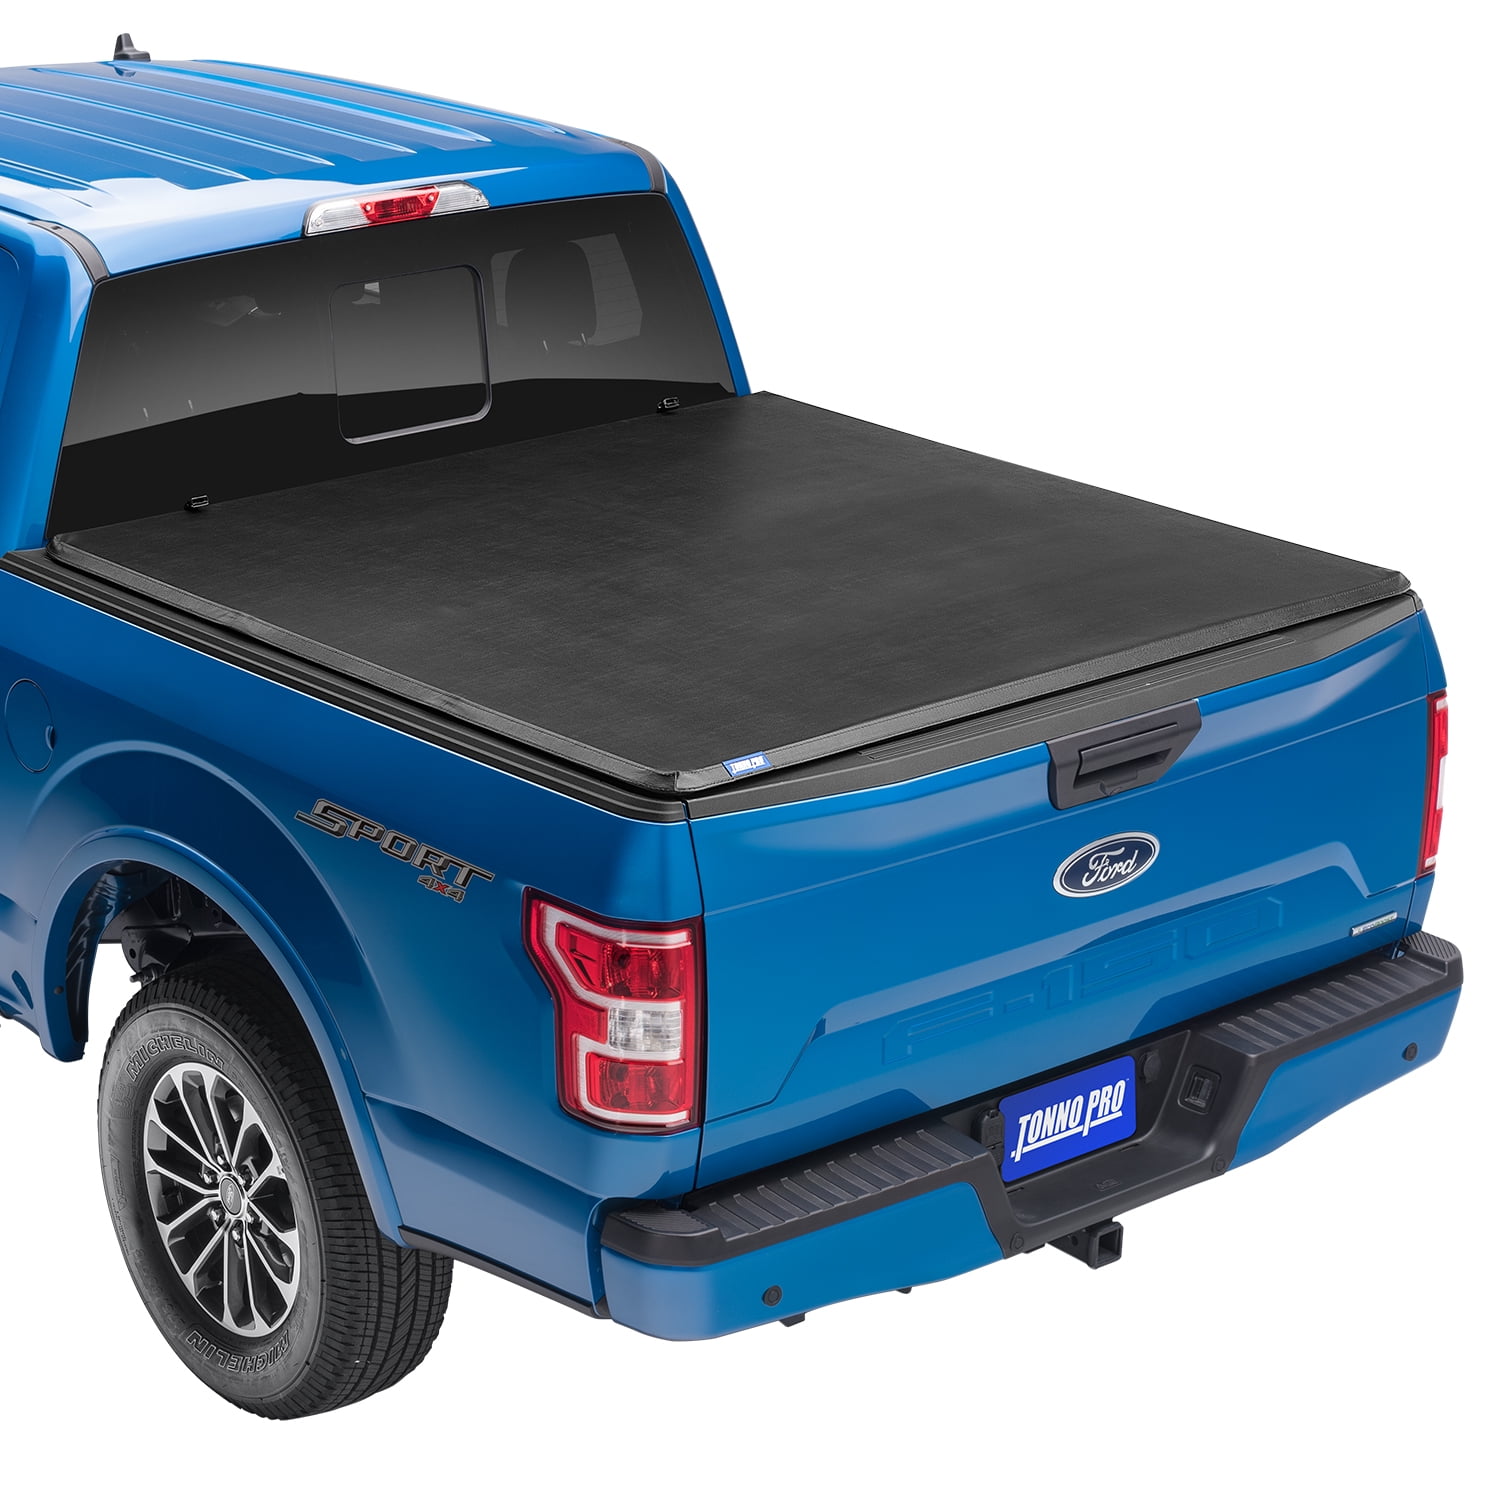 Soft Roll Up Tonneau Cover For 94-02 Dodge Ram 1500/2500 Truck 6.5FT Short Bed